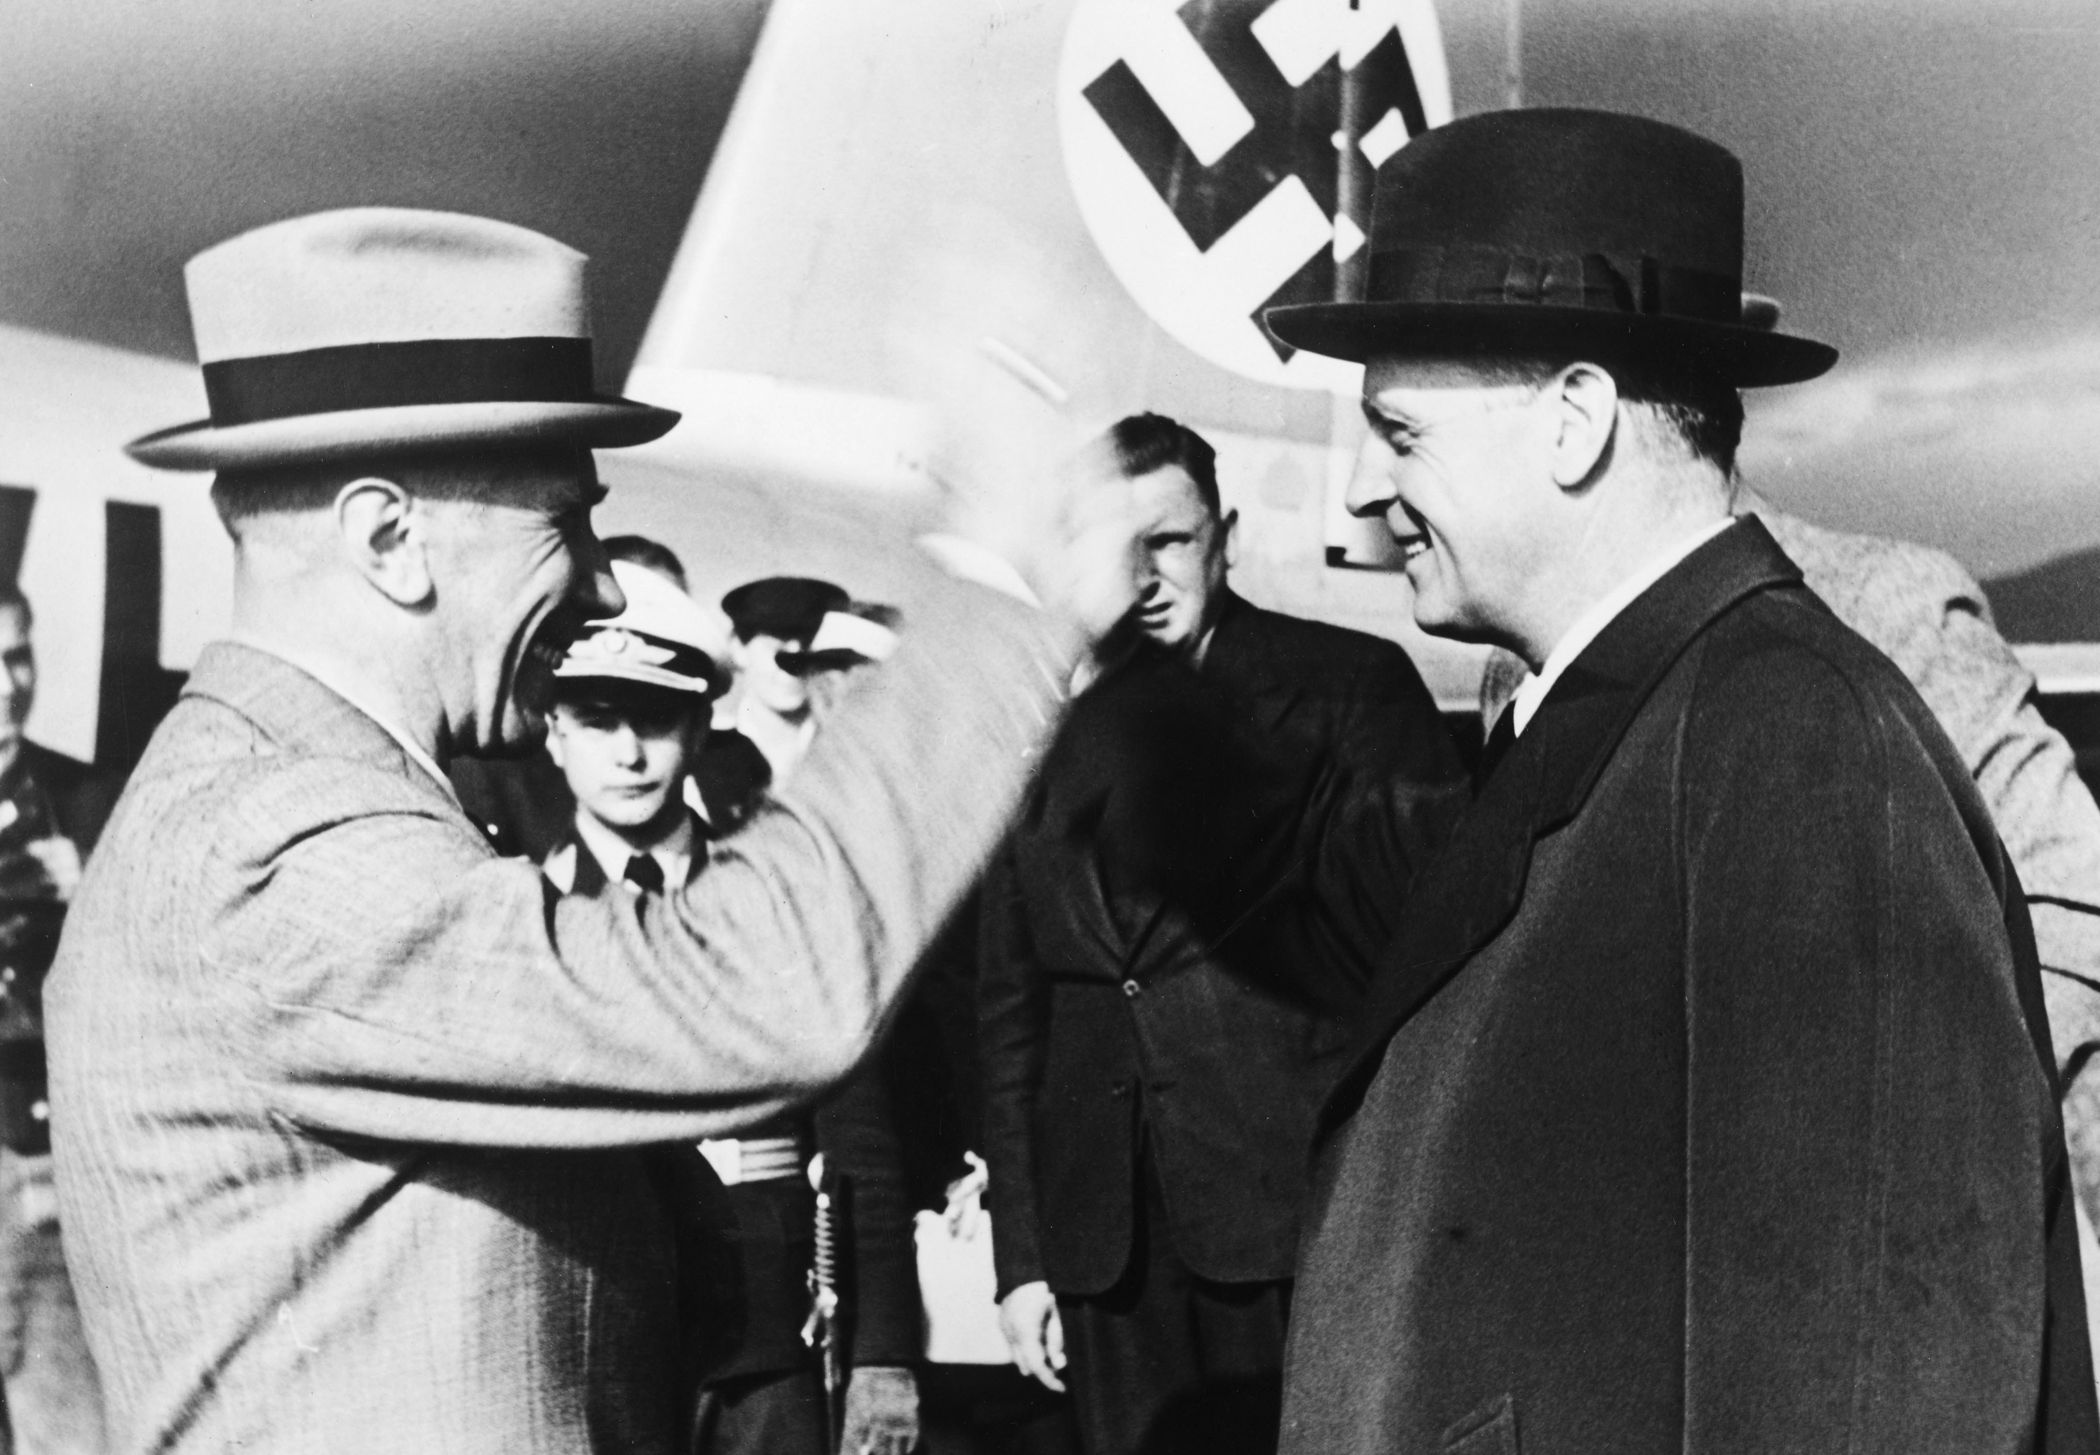 Prior to the signing of the Nazi-Soviet nonagression pact on August 23, 1939, German Foreign Minister Joachim von Ribbentrop departs the company of Ambassador Franz von Papen. (akg-images)